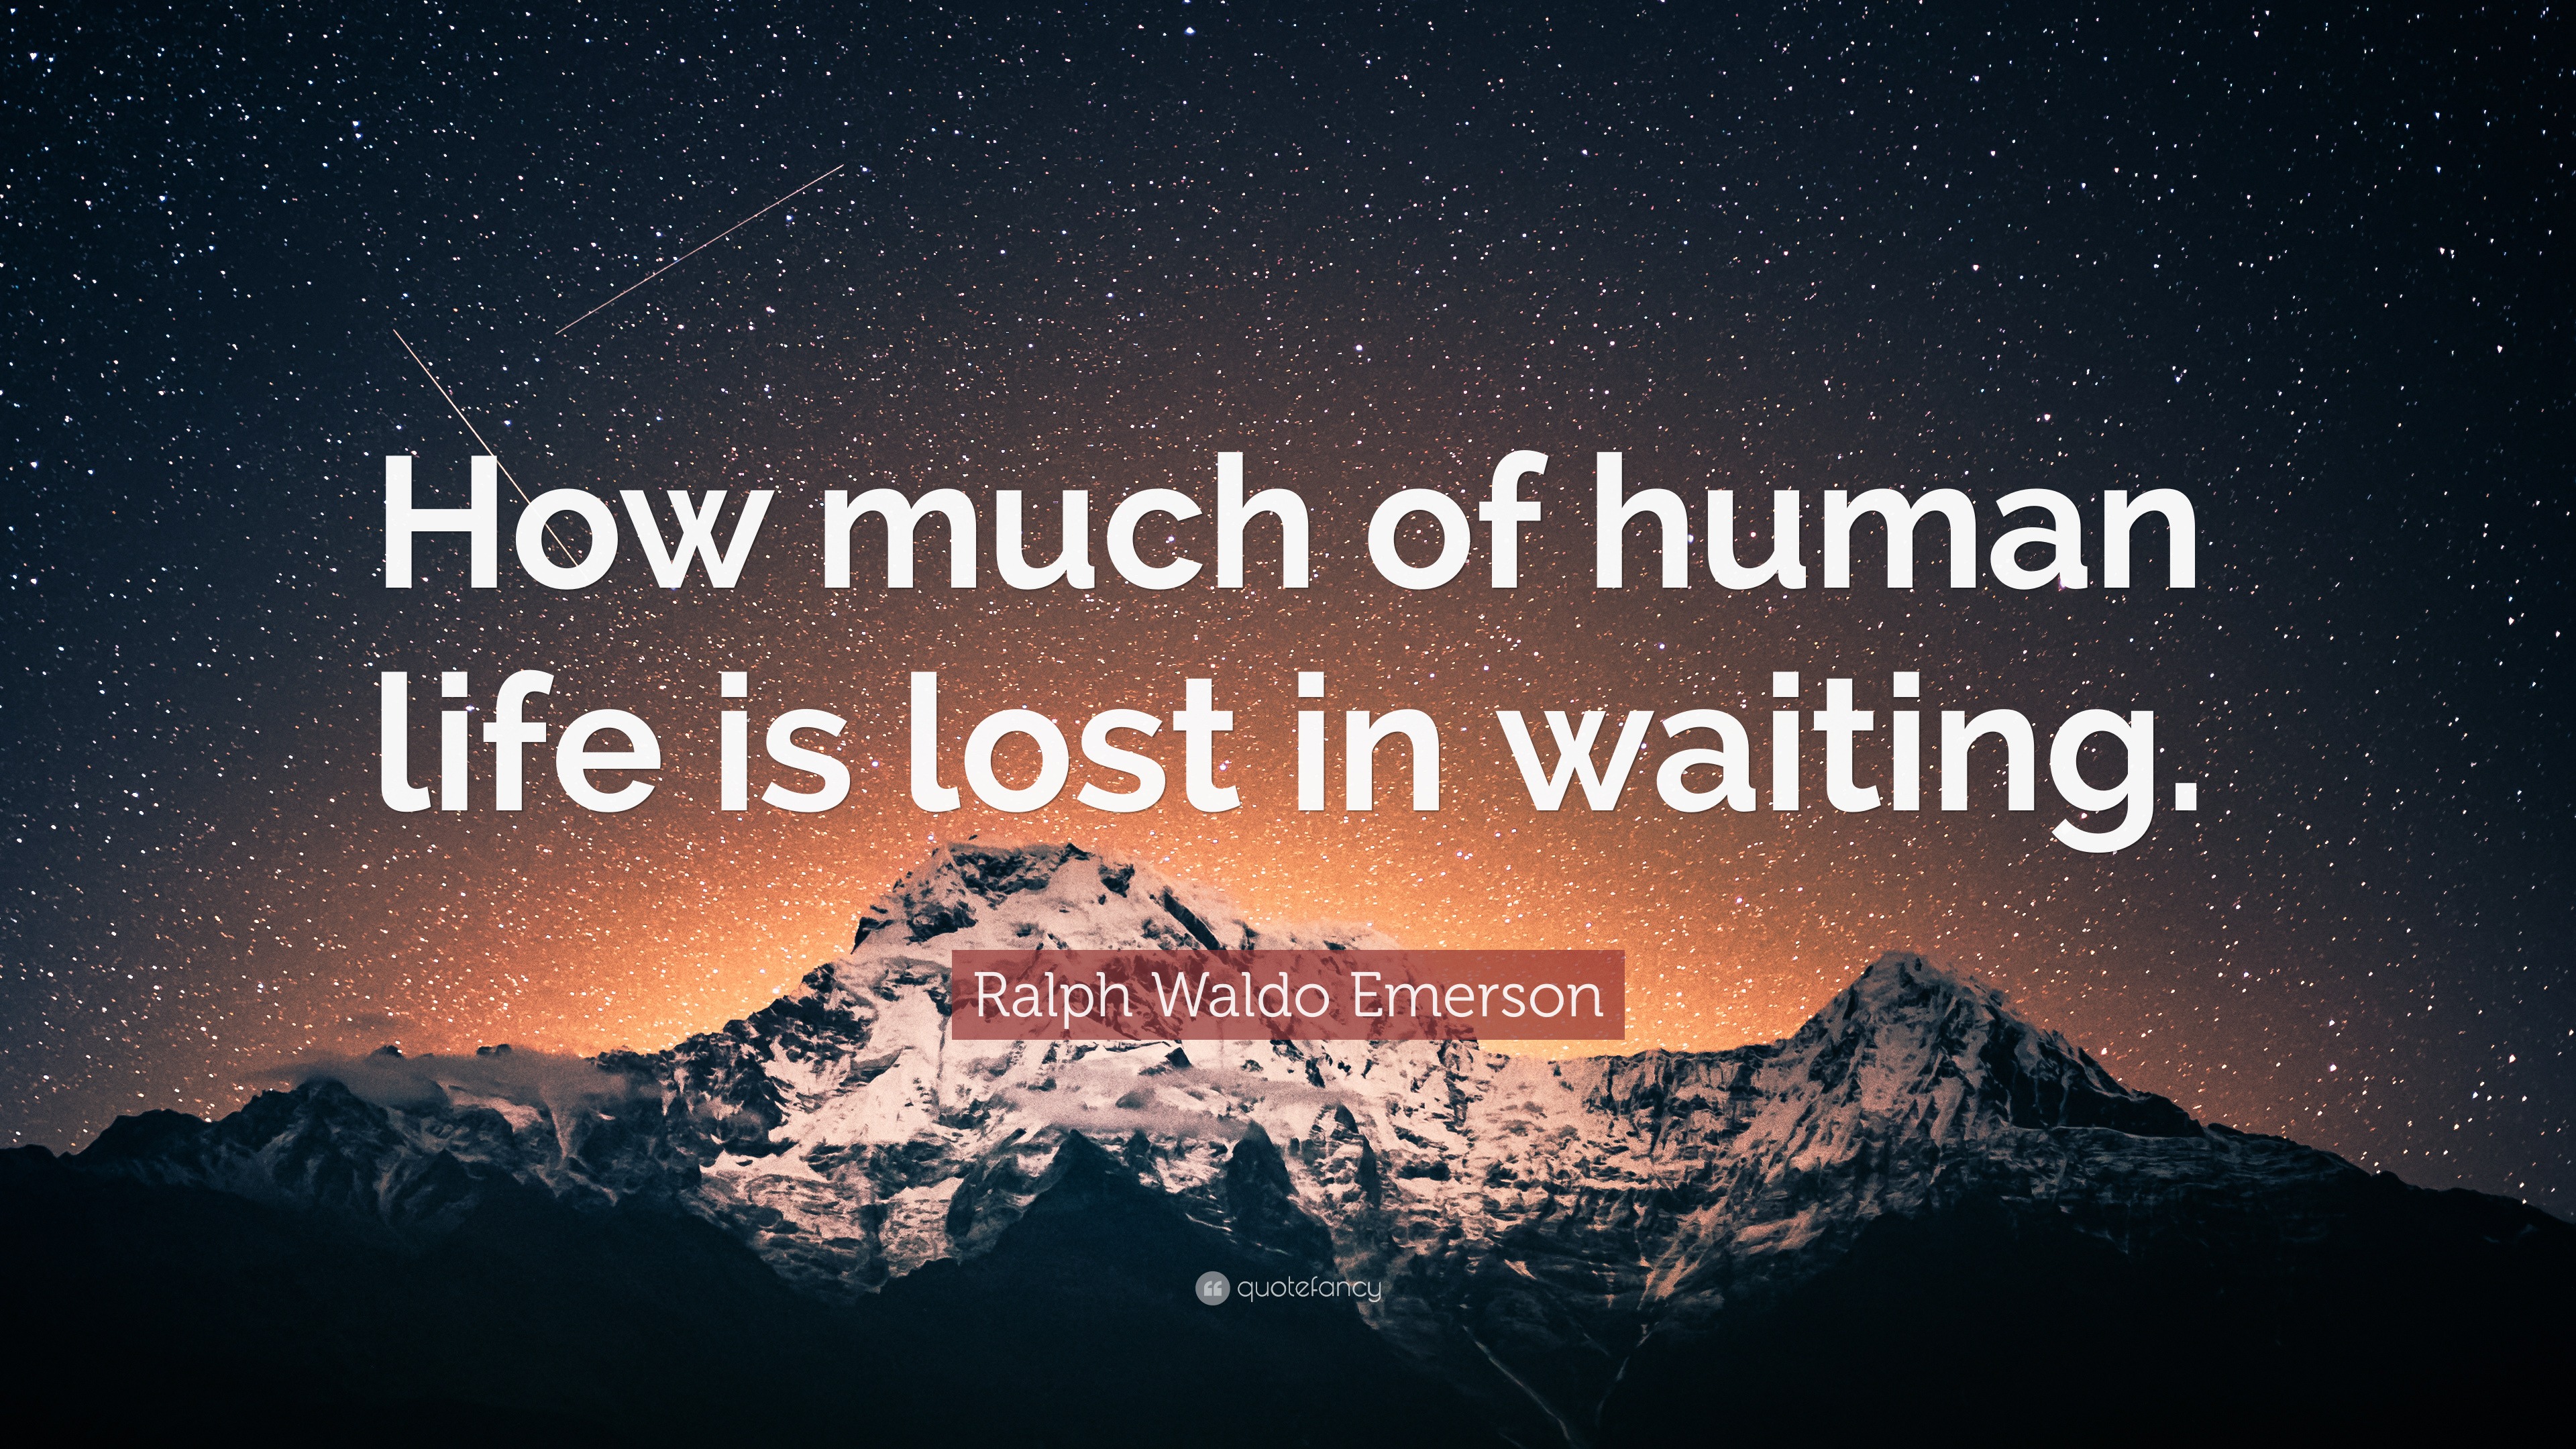 Ralph Waldo Emerson Quote: "How much of human life is lost ...